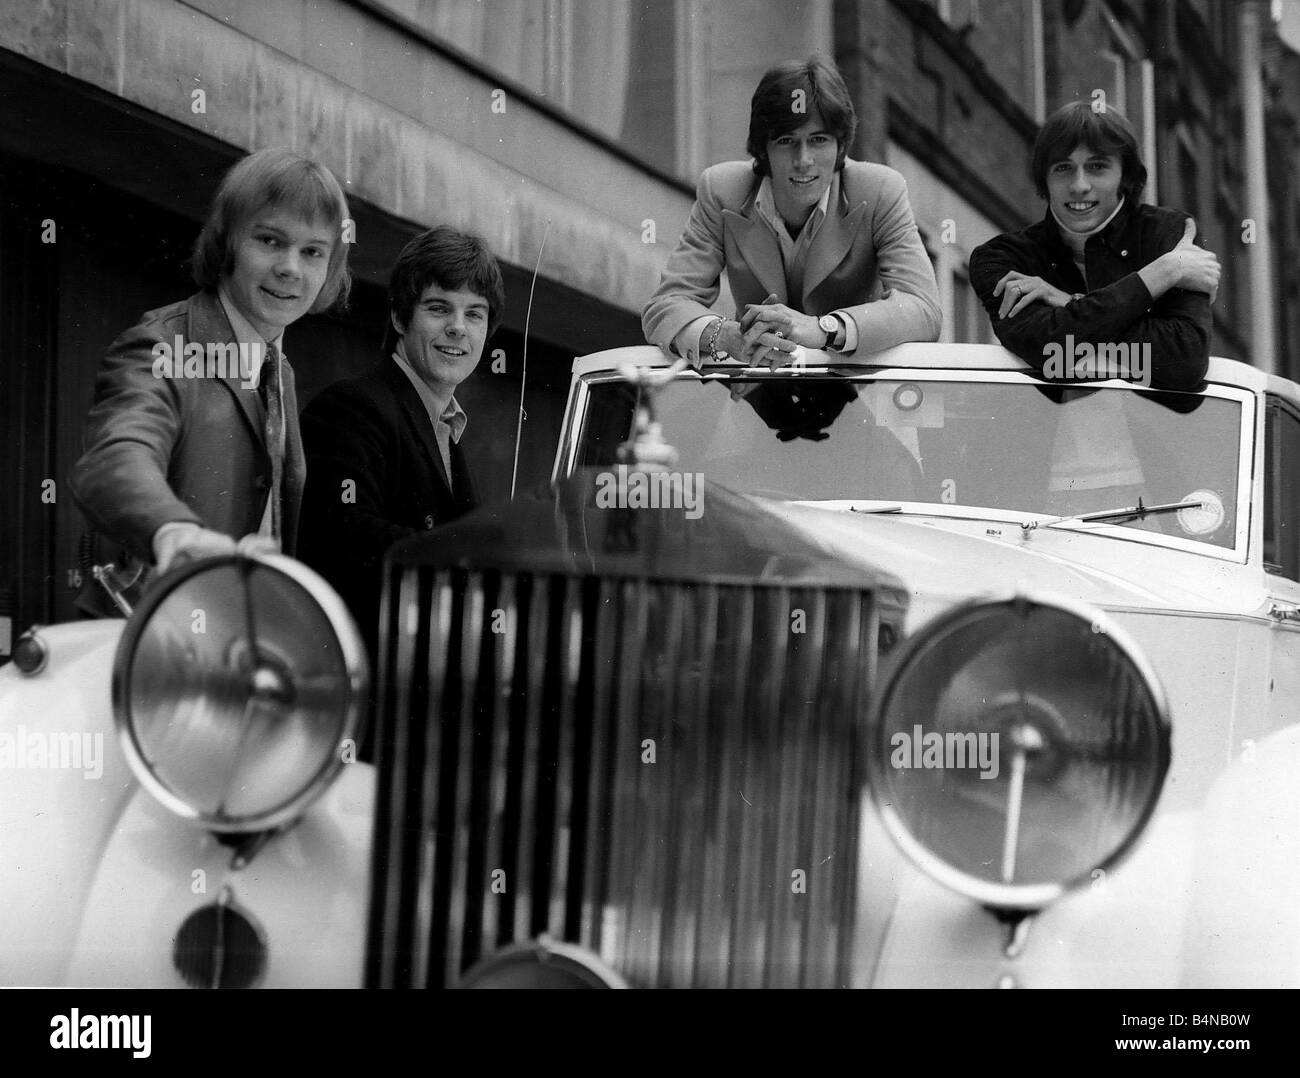 The Bee Gees pop group 1967 Barry Gibb Maurice Gibb Colin Petersen and Vince Melouney Local Caption retromusic Stock Photo